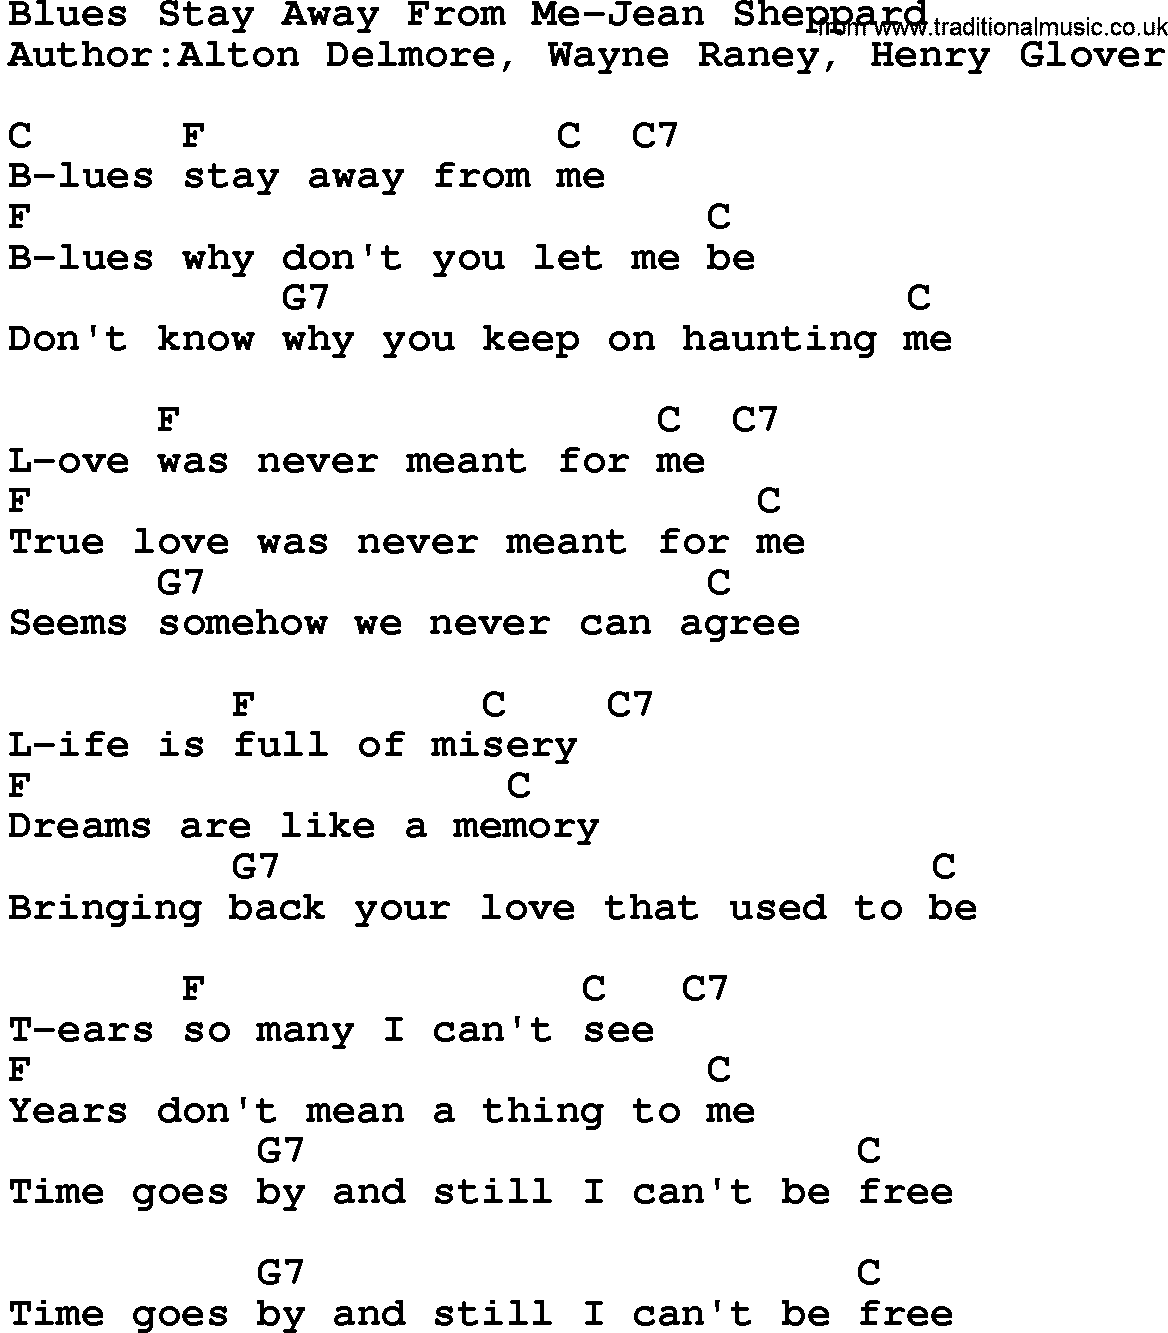 Country music song: Blues Stay Away From Me-Jean Sheppard lyrics and chords